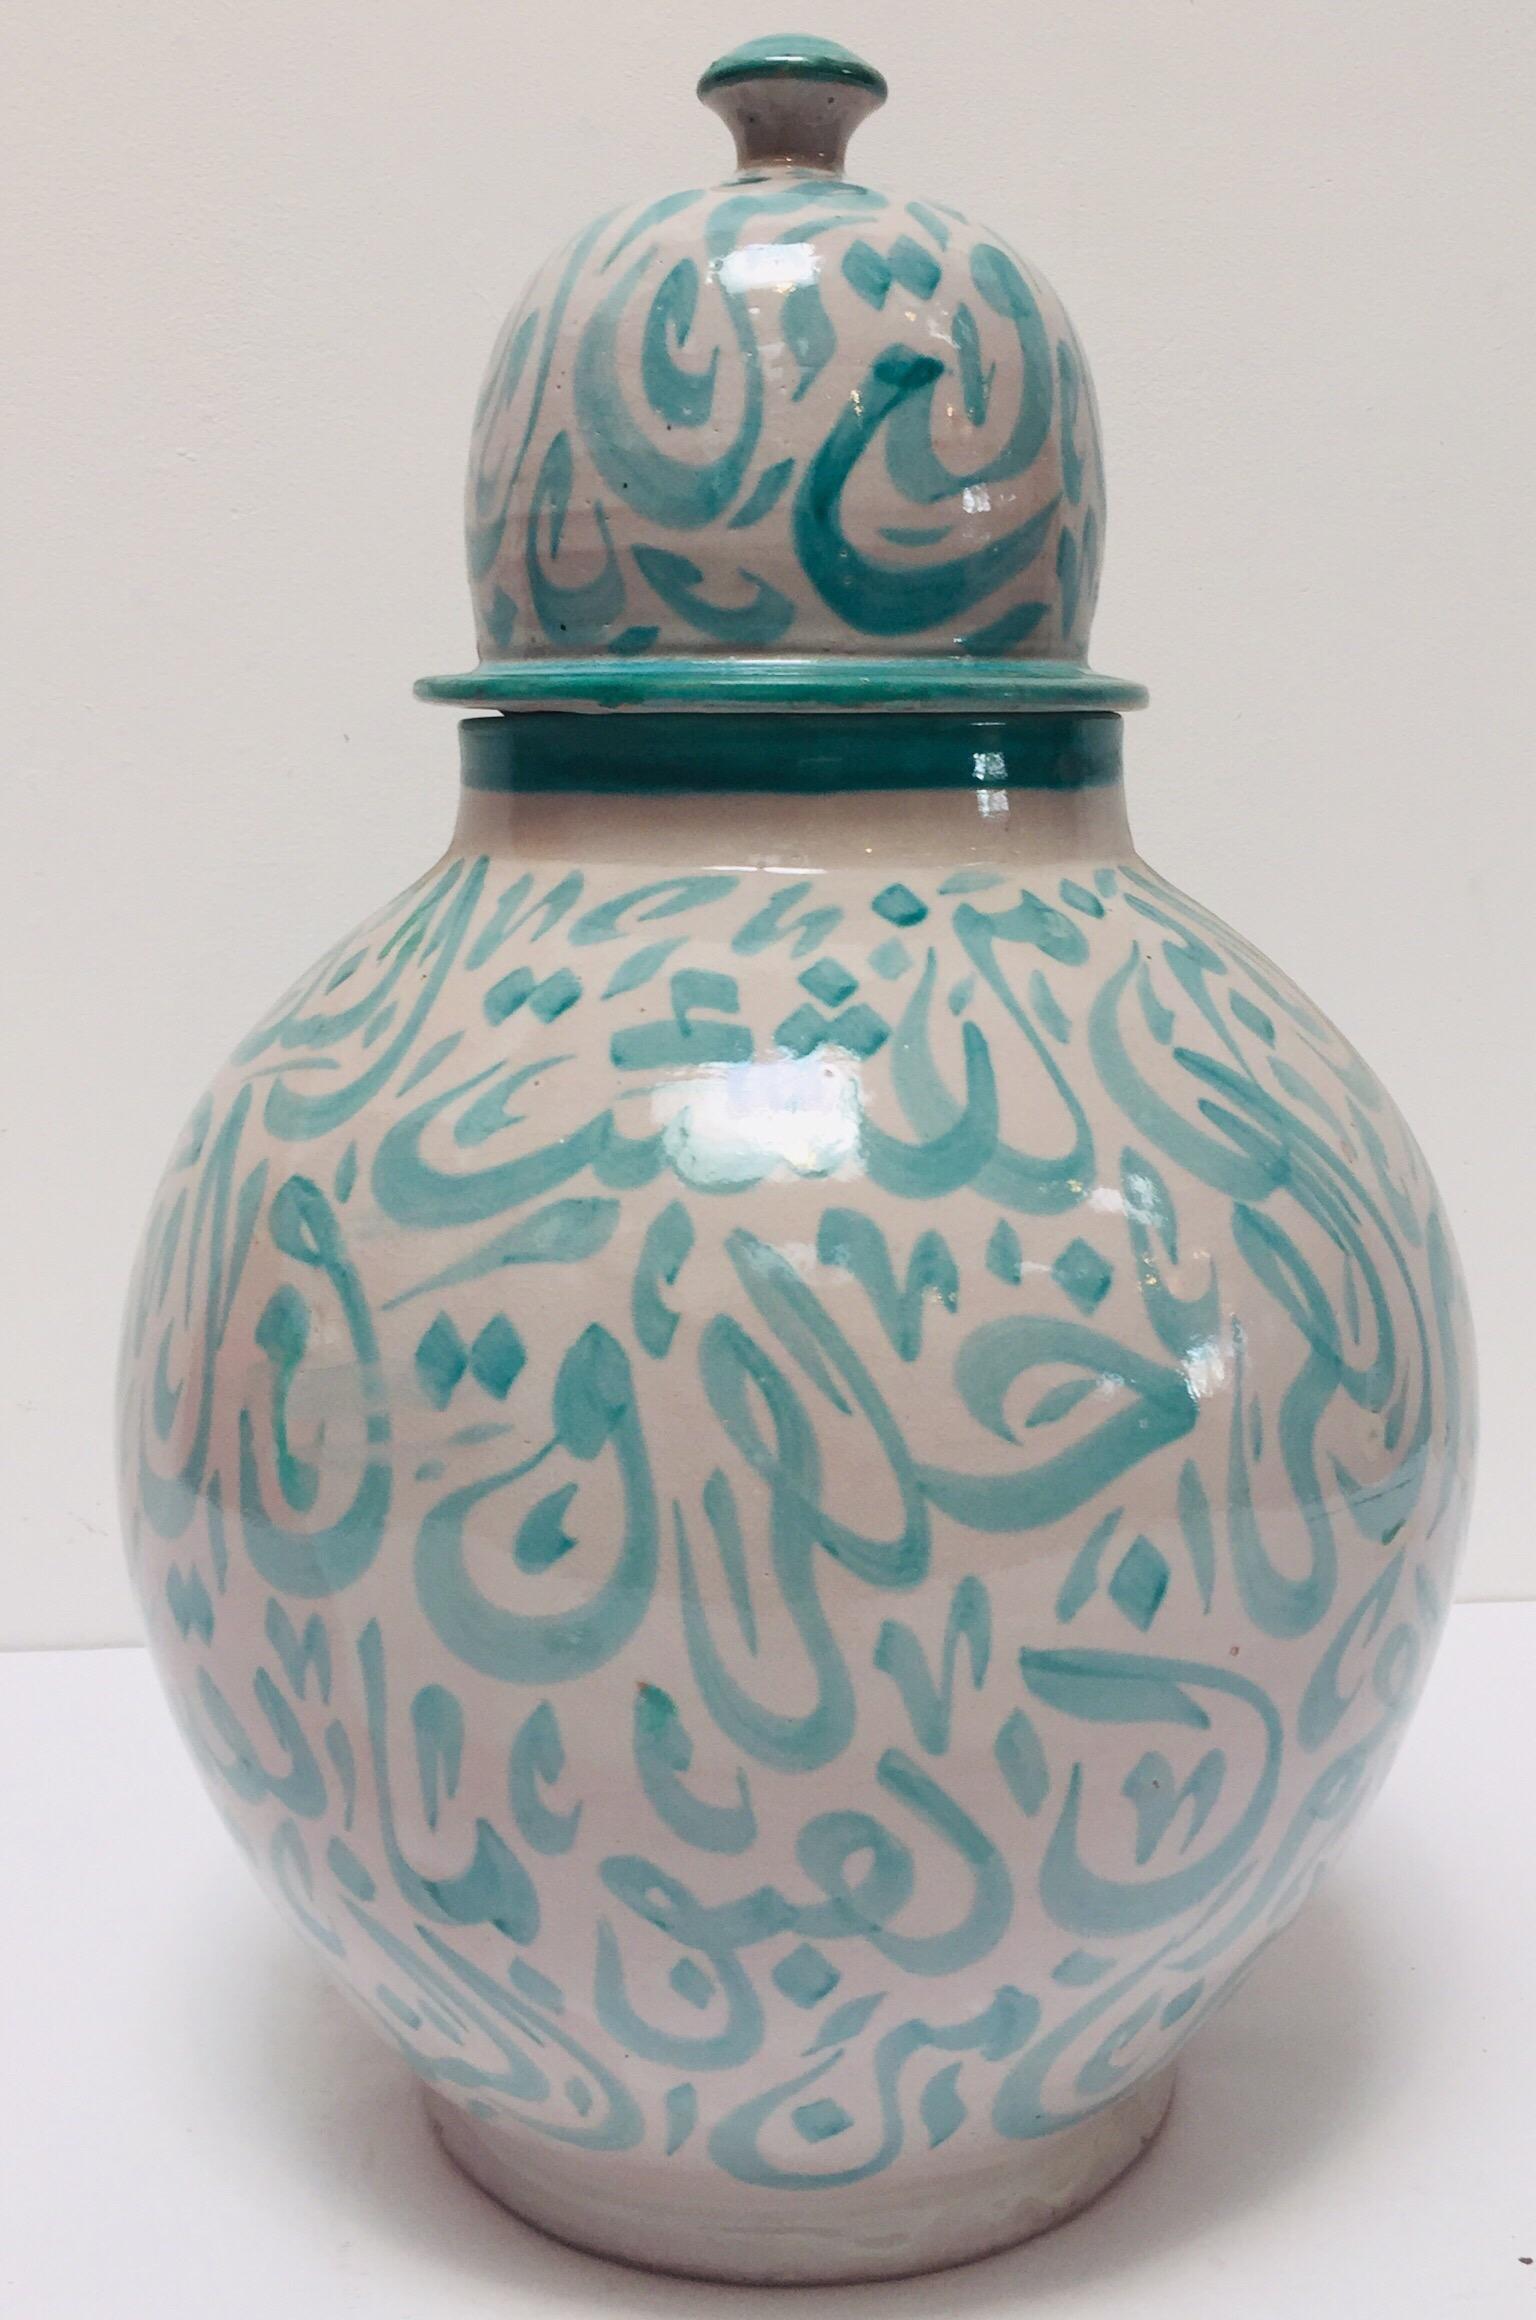 Moroccan Ceramic Lidded Urn from Fez with Arabic Calligraphy Lettrism Writing 1